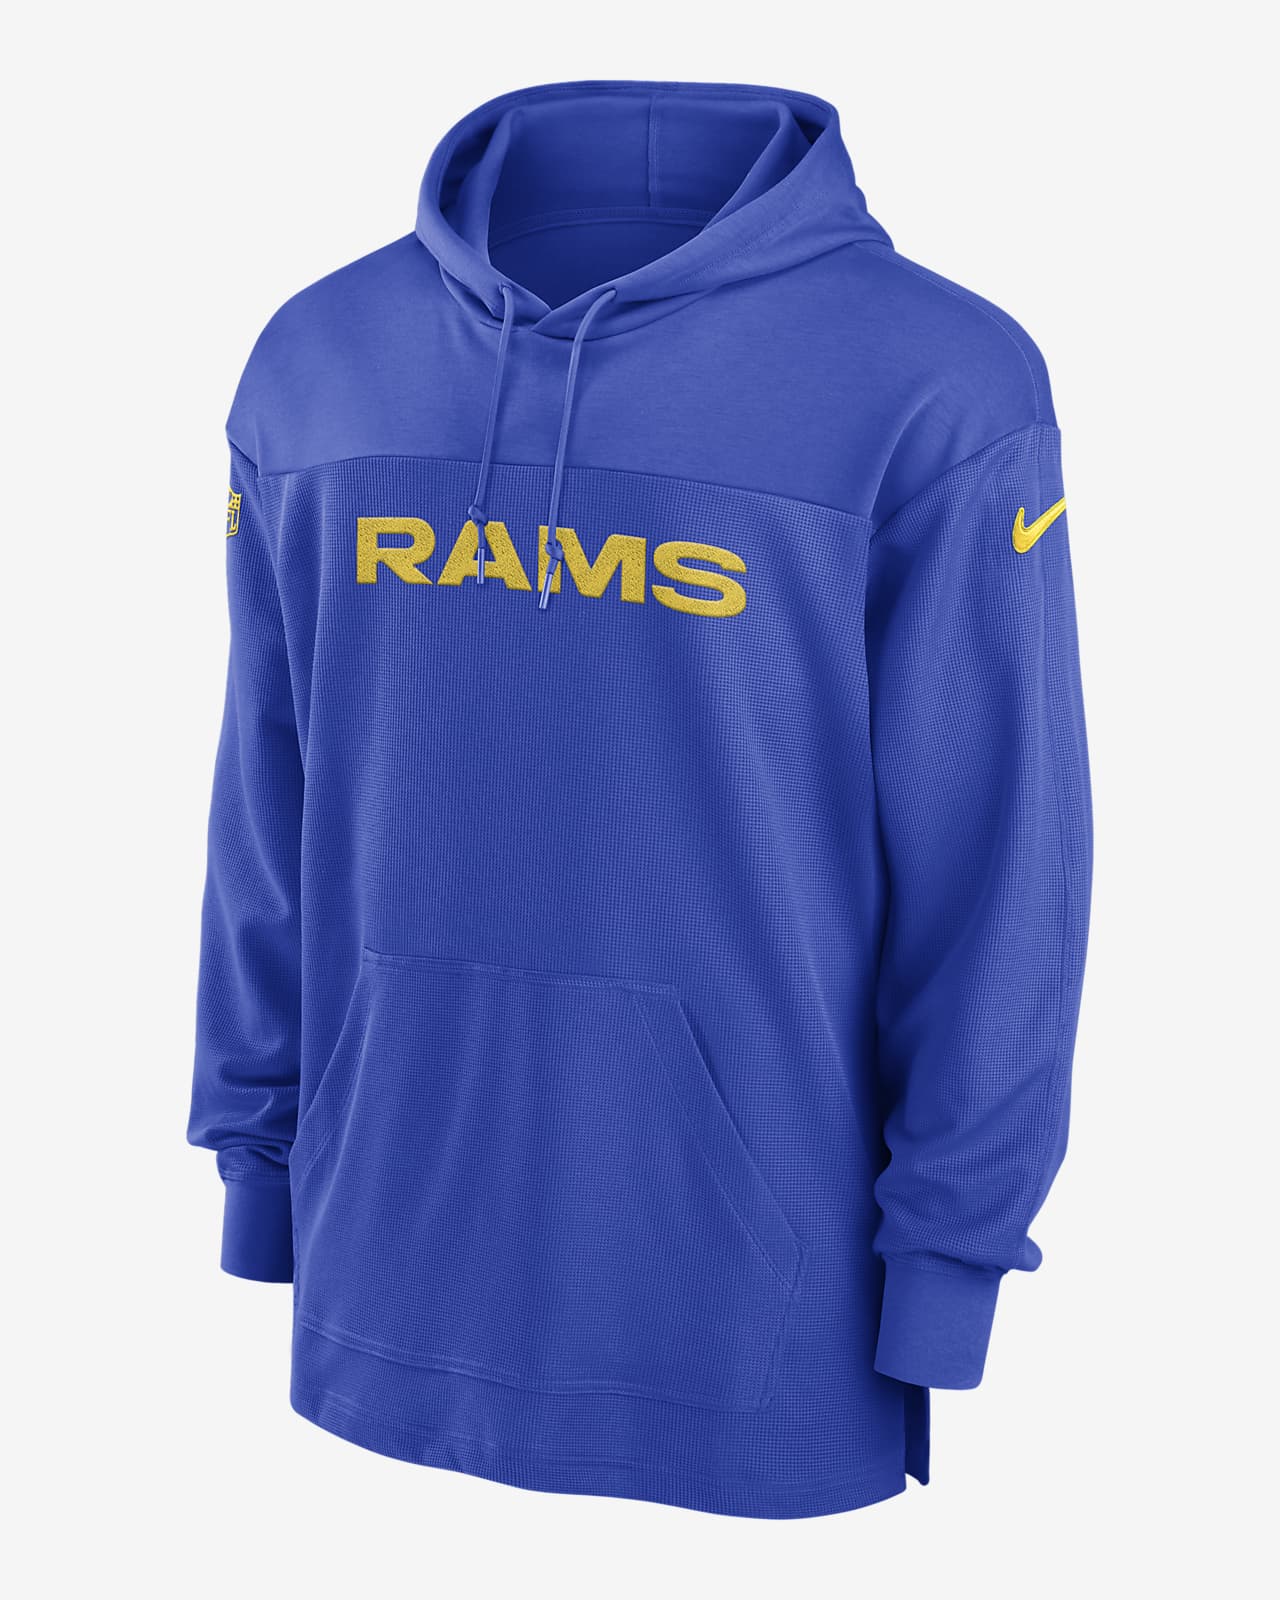 Los Angeles Rams Sideline Men’s Nike Men's Dri-Fit NFL Long-Sleeve Hooded Top in Blue, Size: Small | 00MQ4NP95-PKB